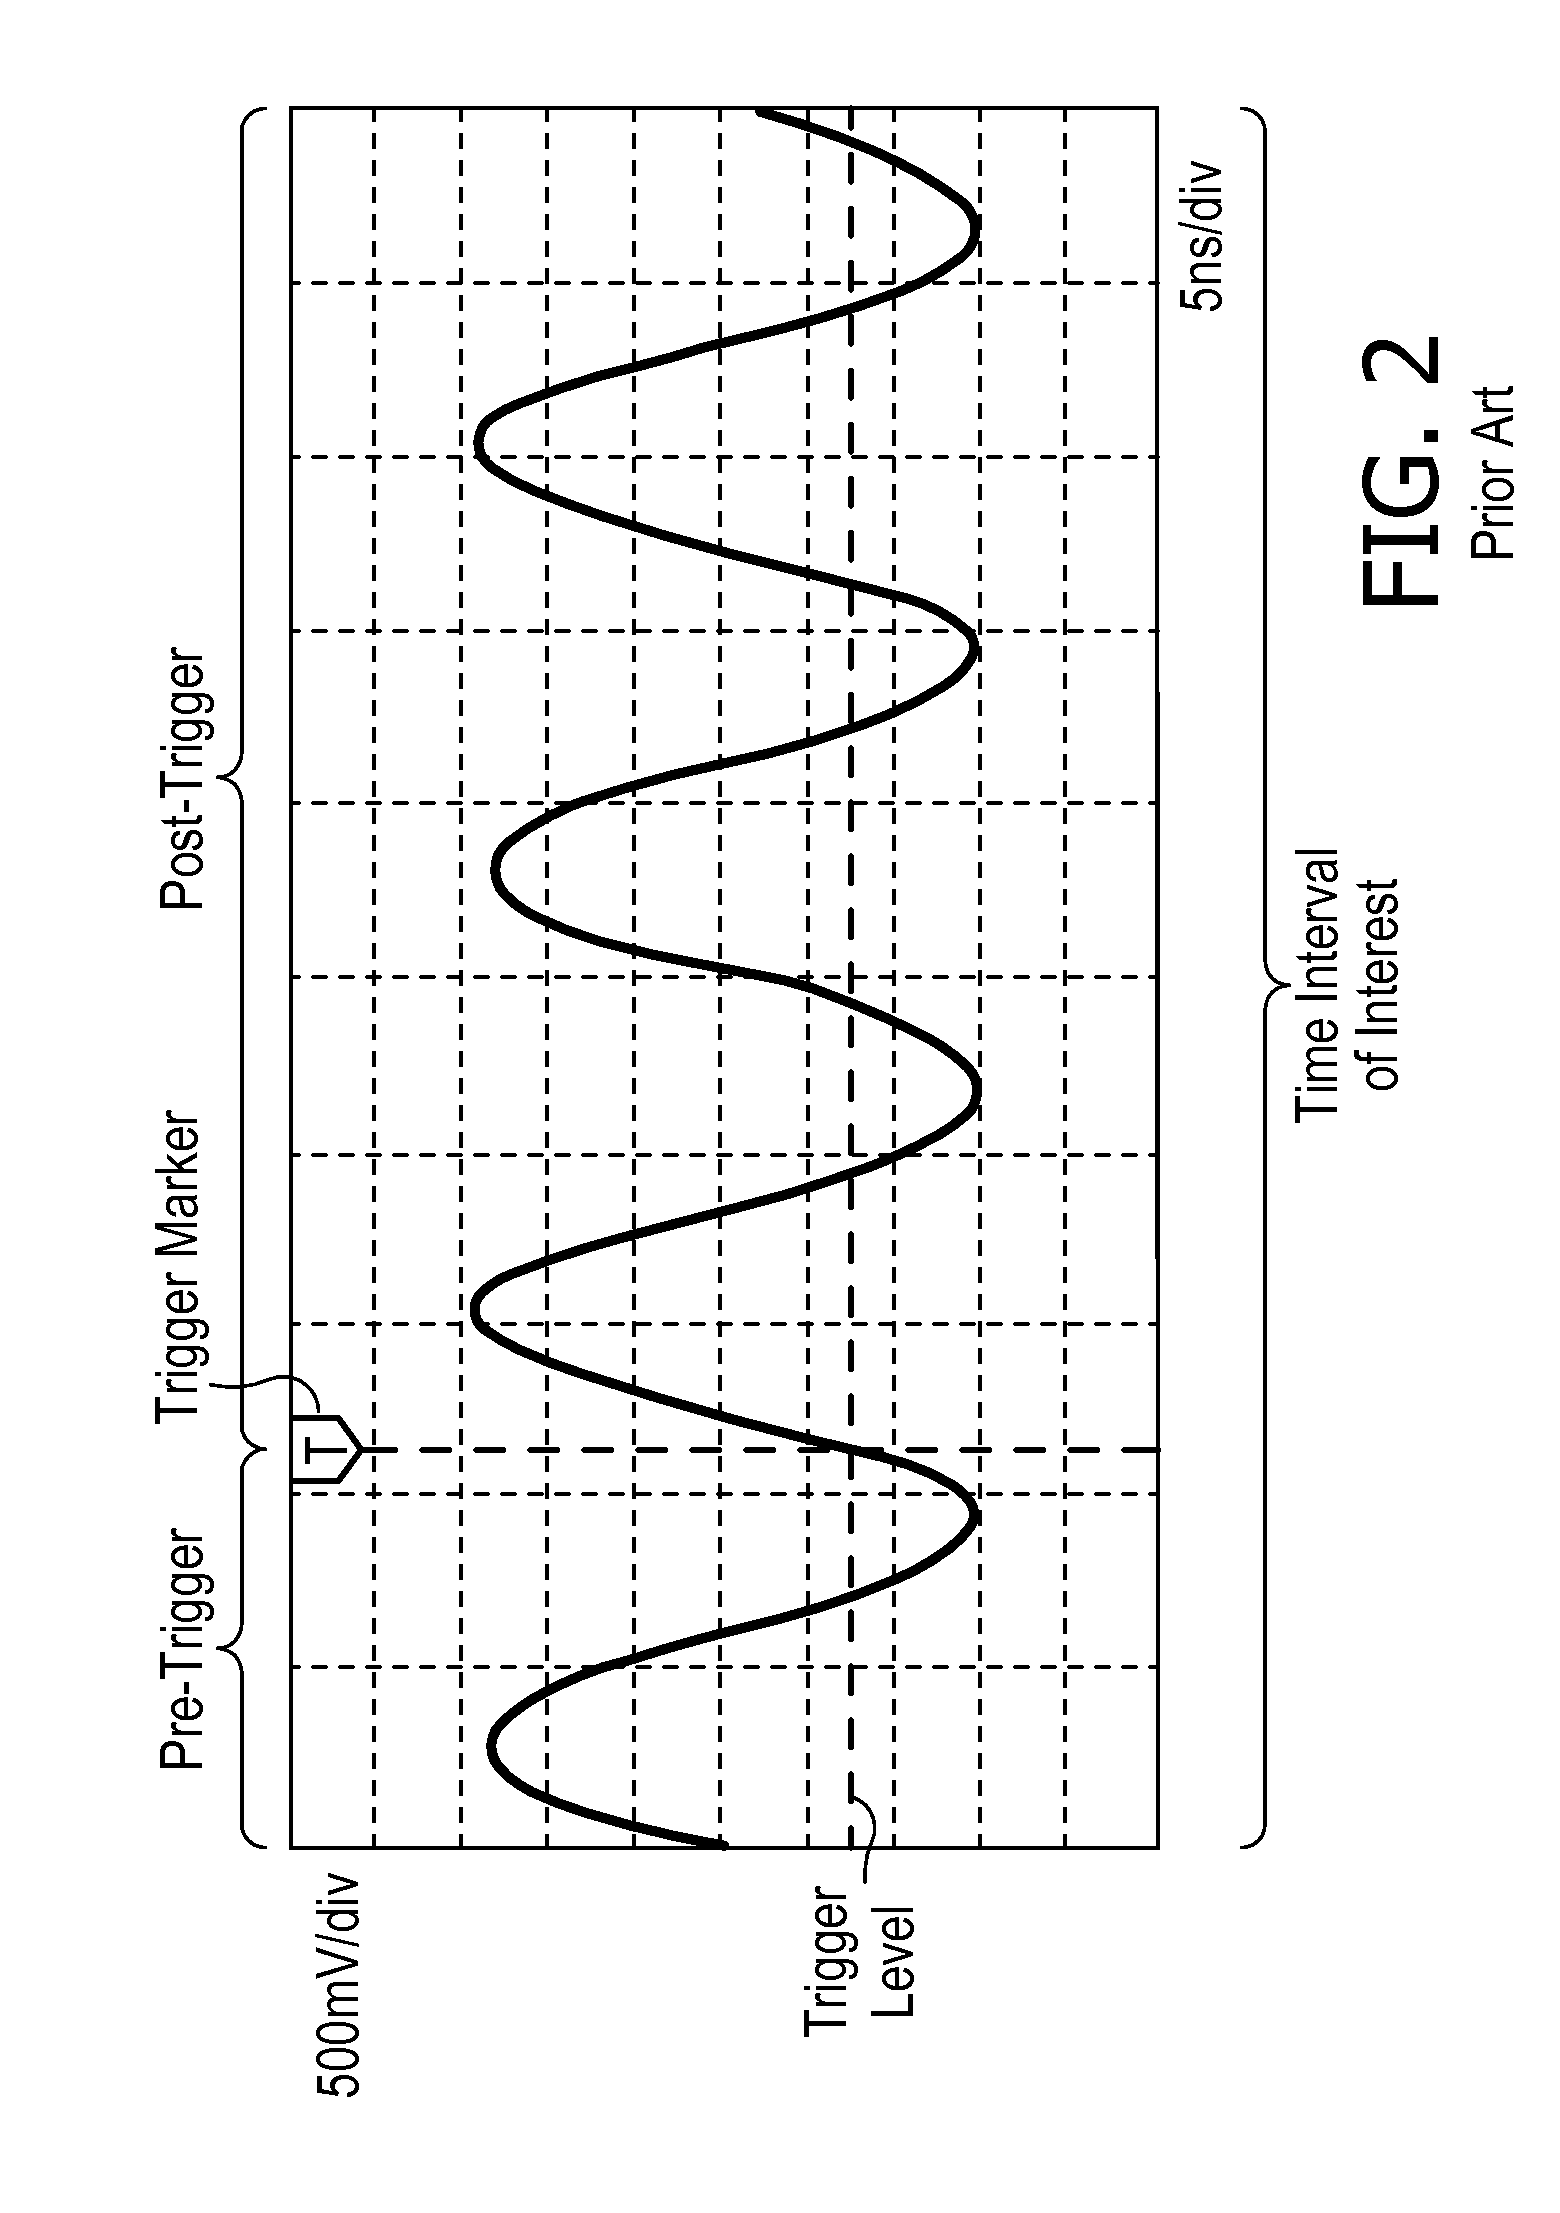 High waveform throughput with a large acquisition memory